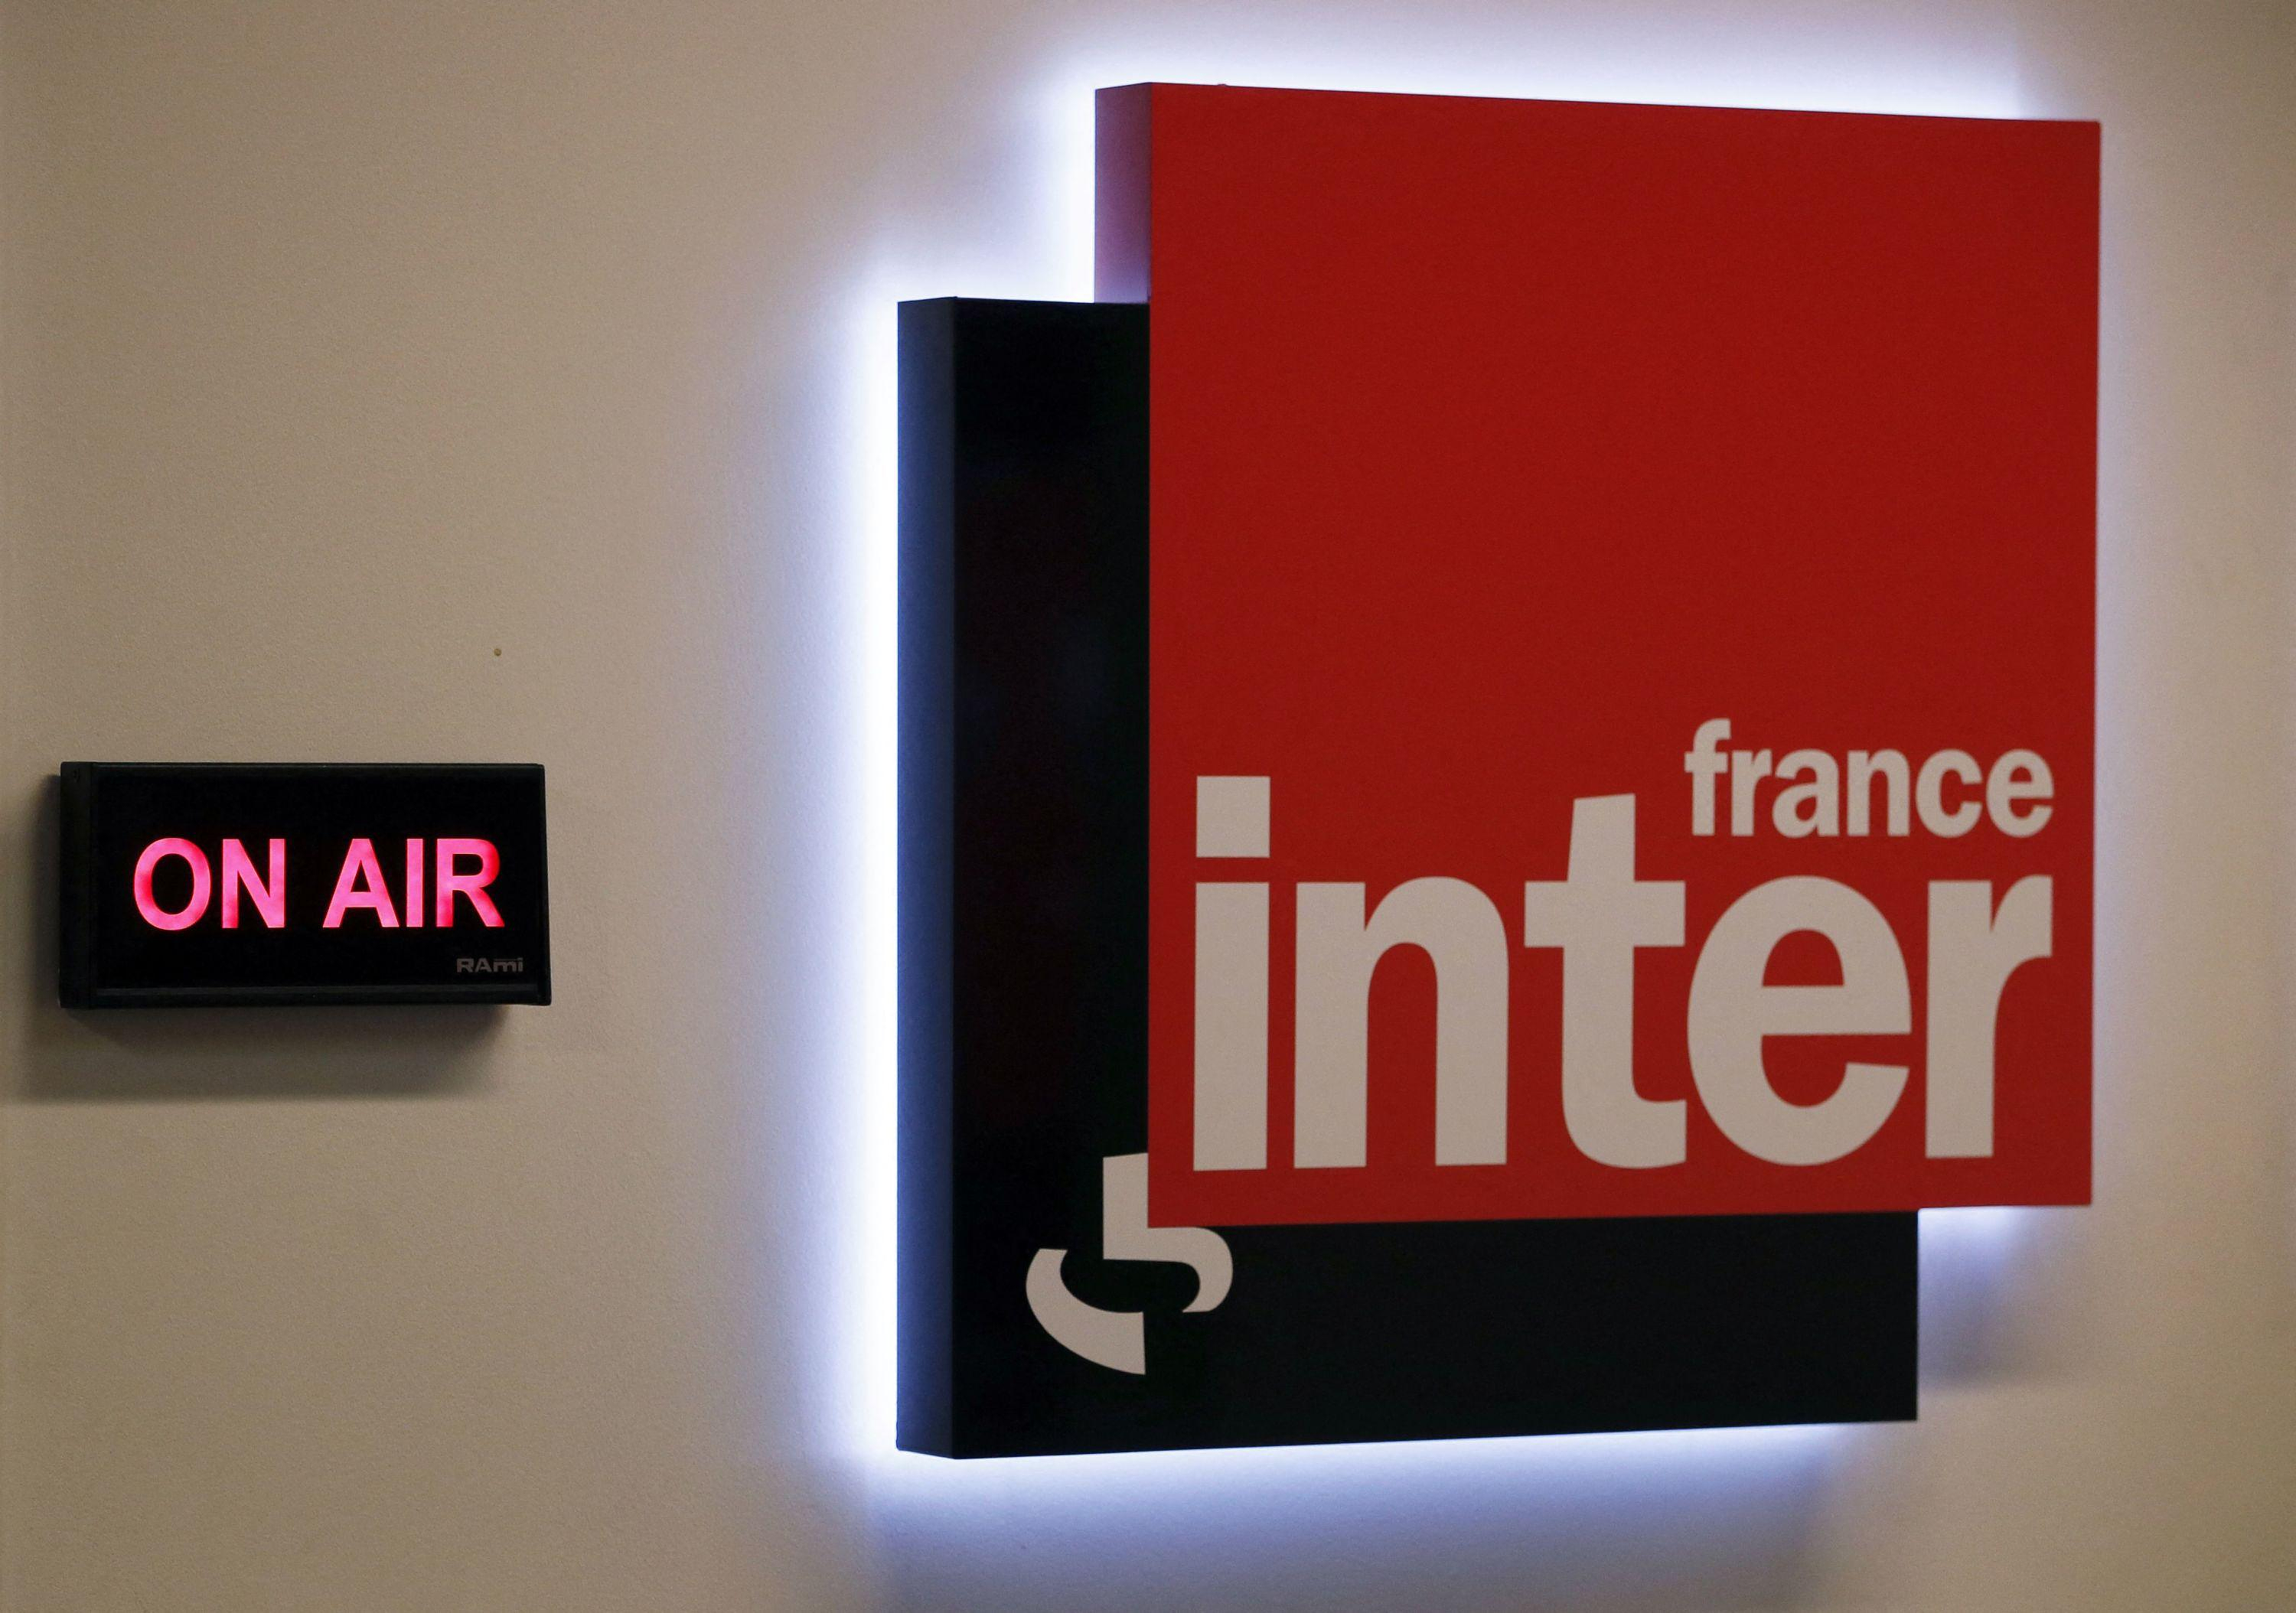 Radio audiences: France Inter remains firmly in the lead, Europe 1 continues its rise